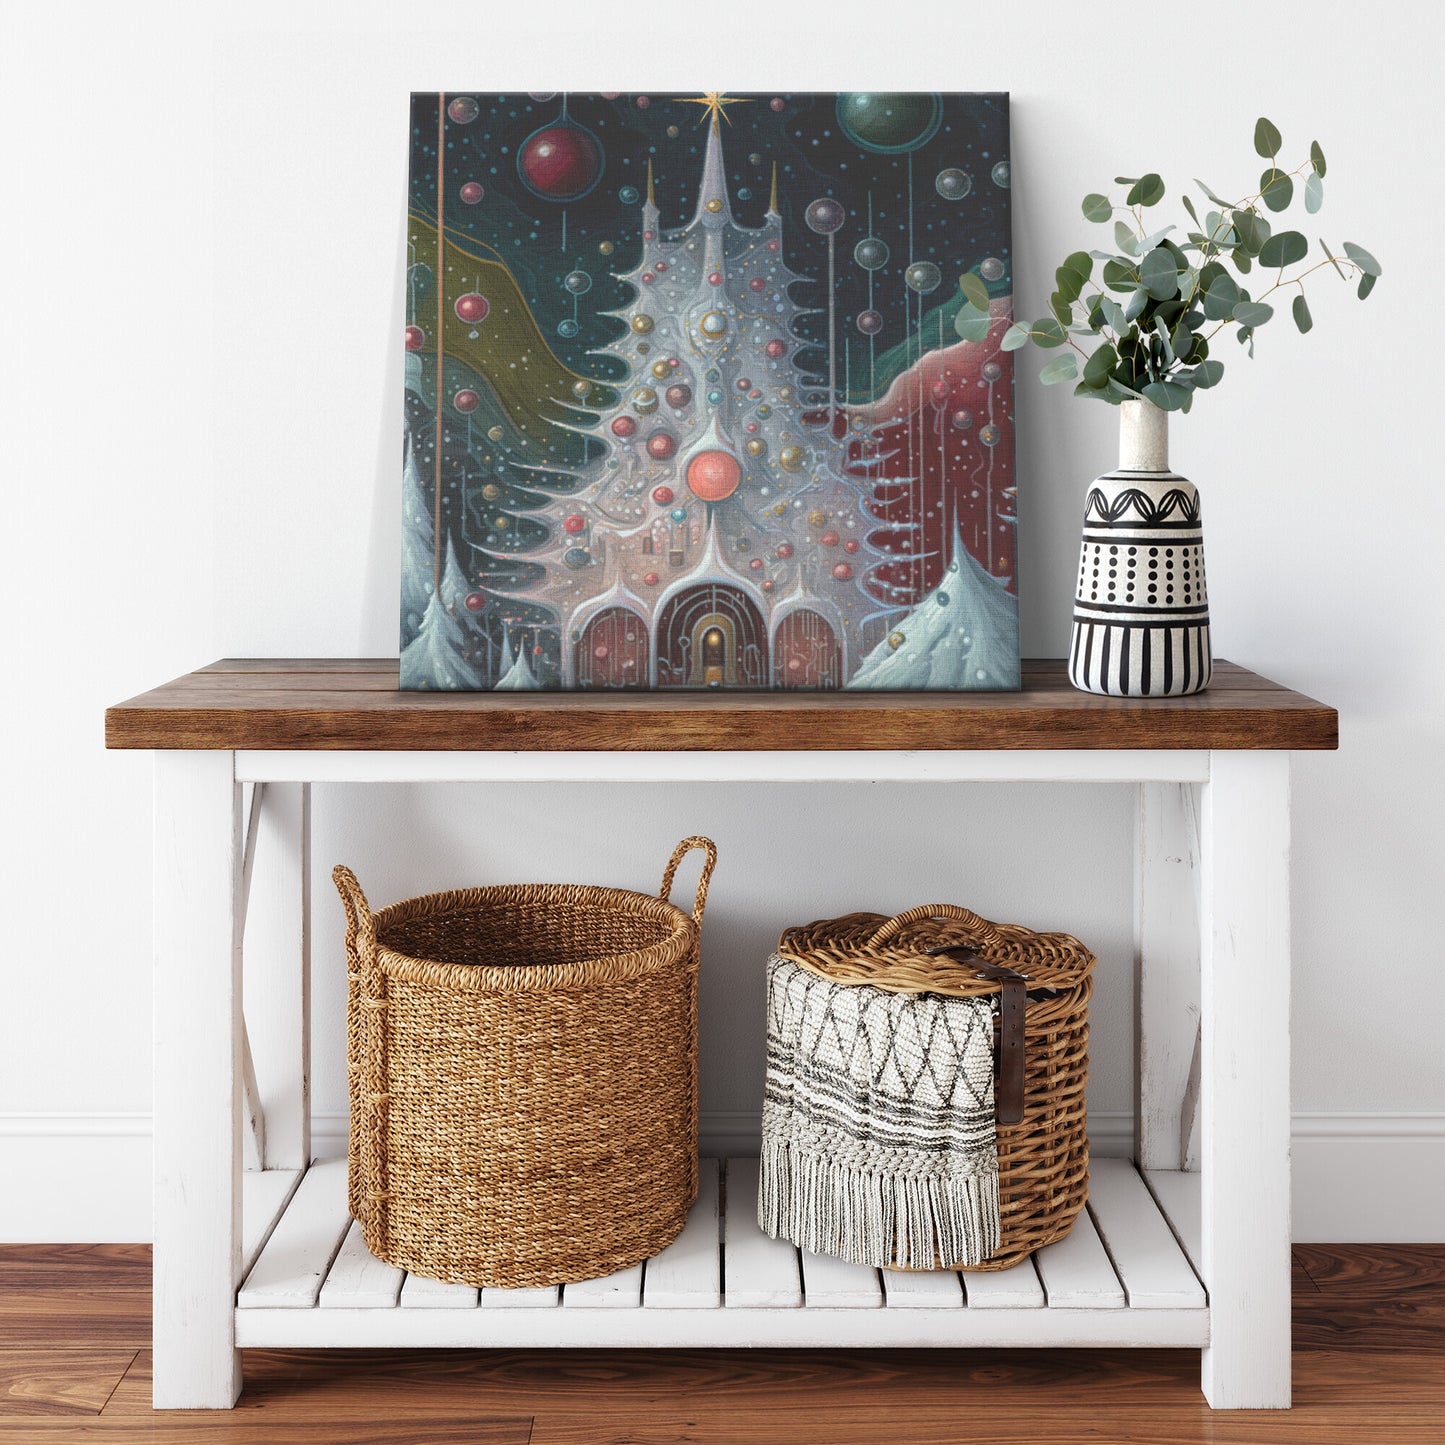 Abstract Snowy Christmas Tree Painting, Midjourney AI Generated Christmas Art